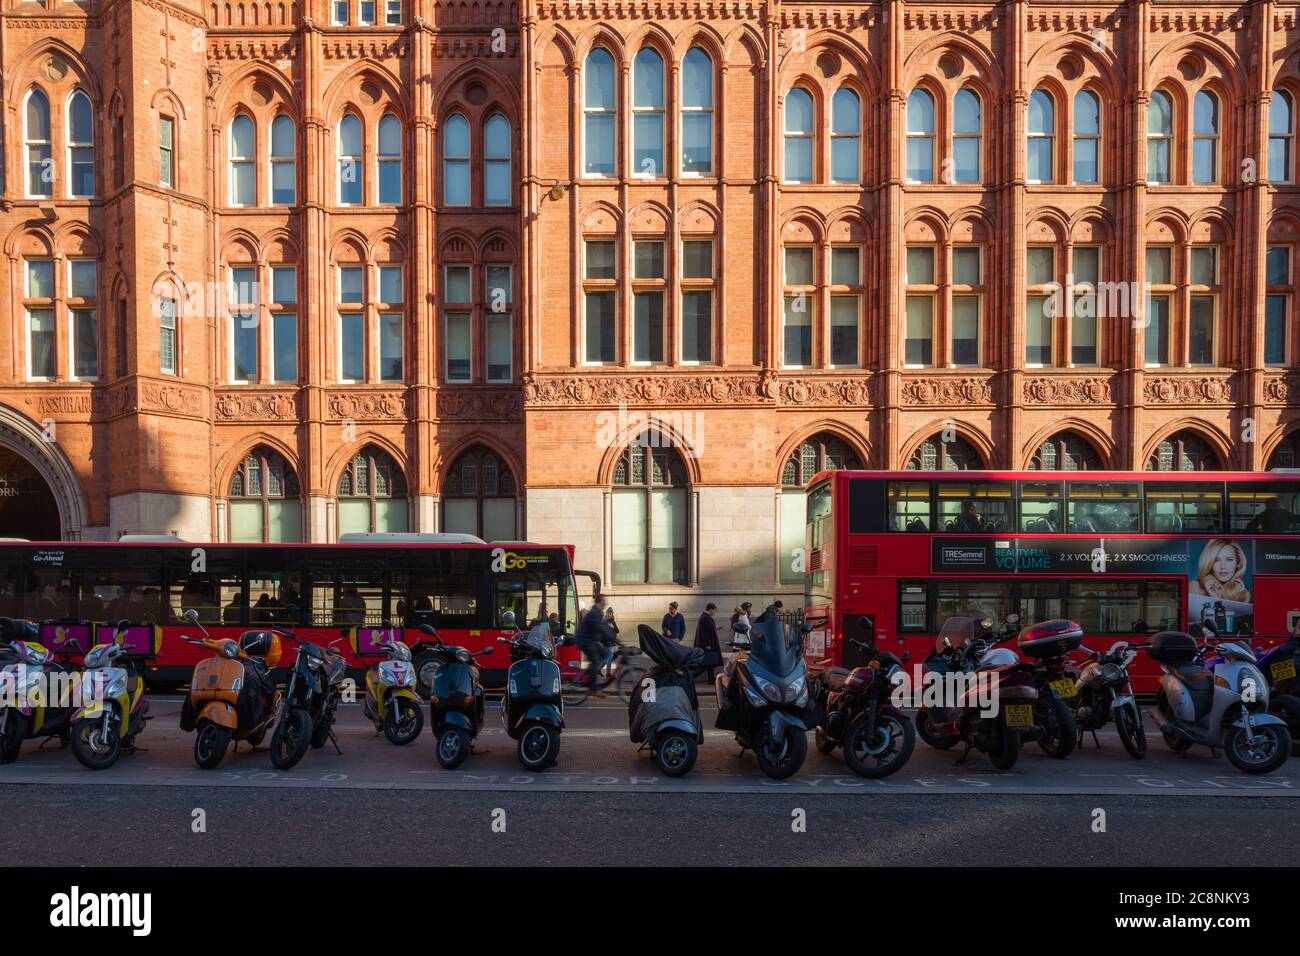 Parked motorbikes and red Transport for London buses in front of imposing terracotta facade of Prudential Assurance Building (aka Holborn Bars). Stock Photo